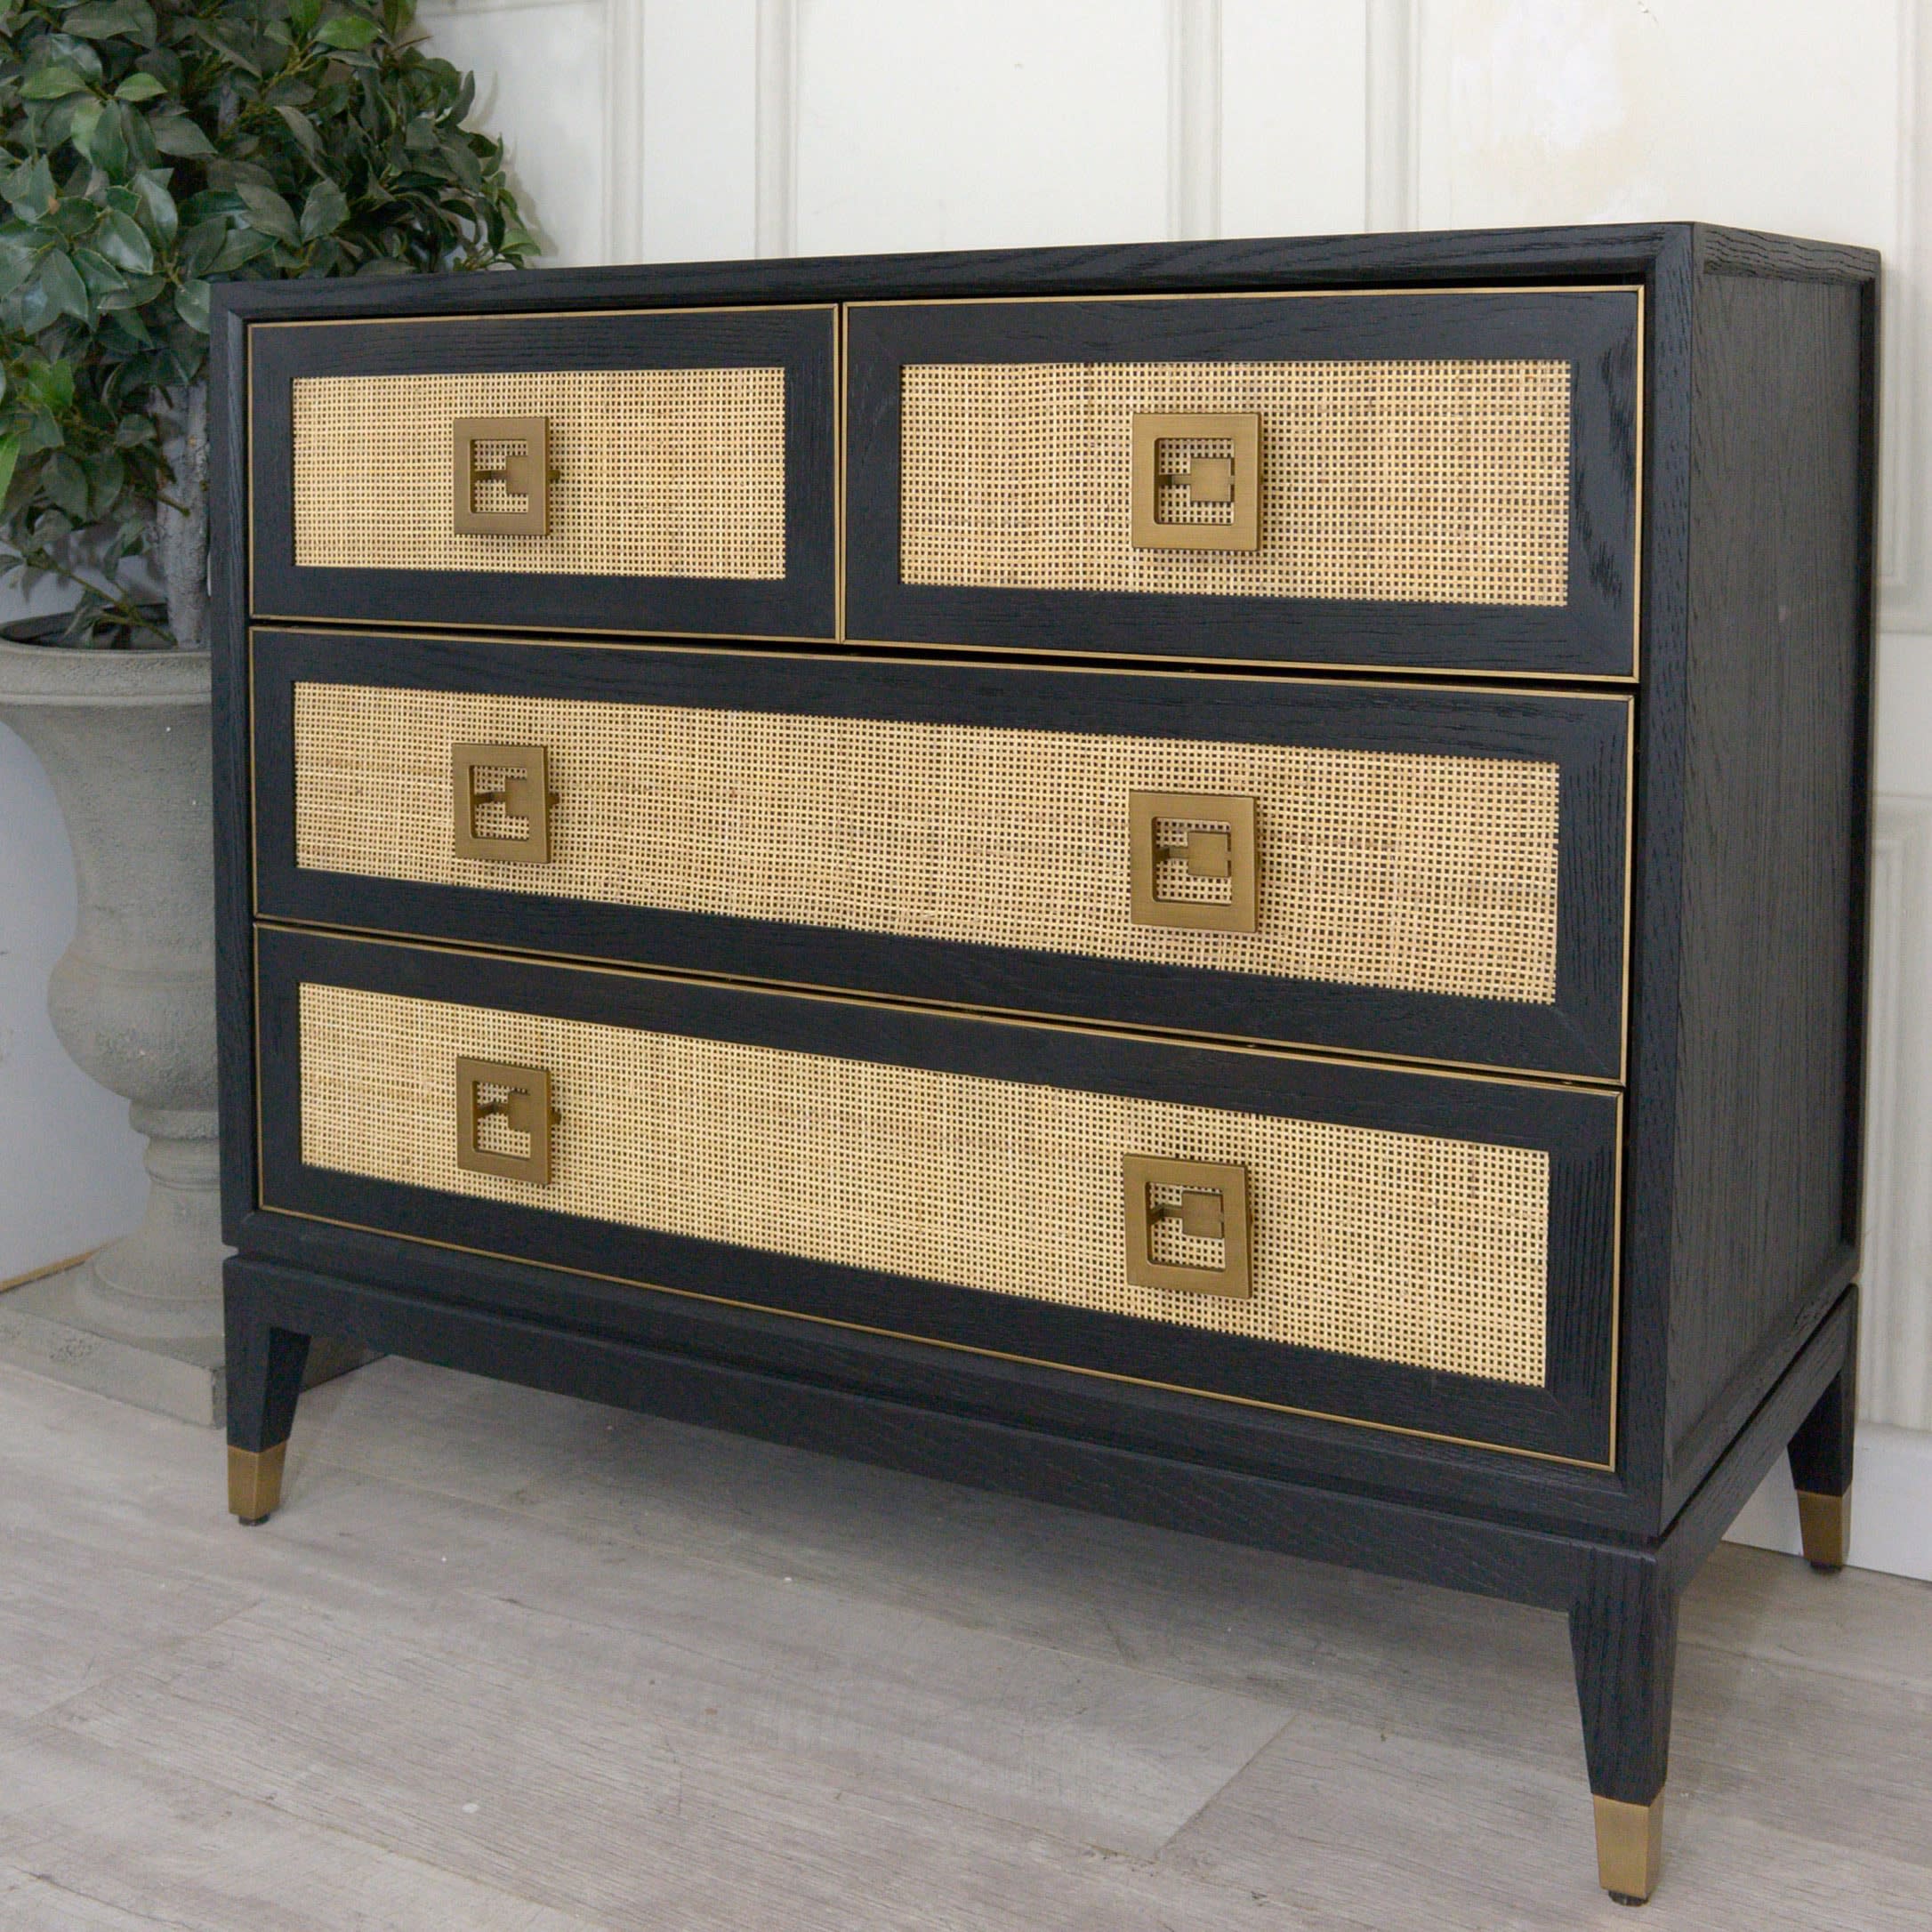 Cafe Noir Rattan Chest of Drawers